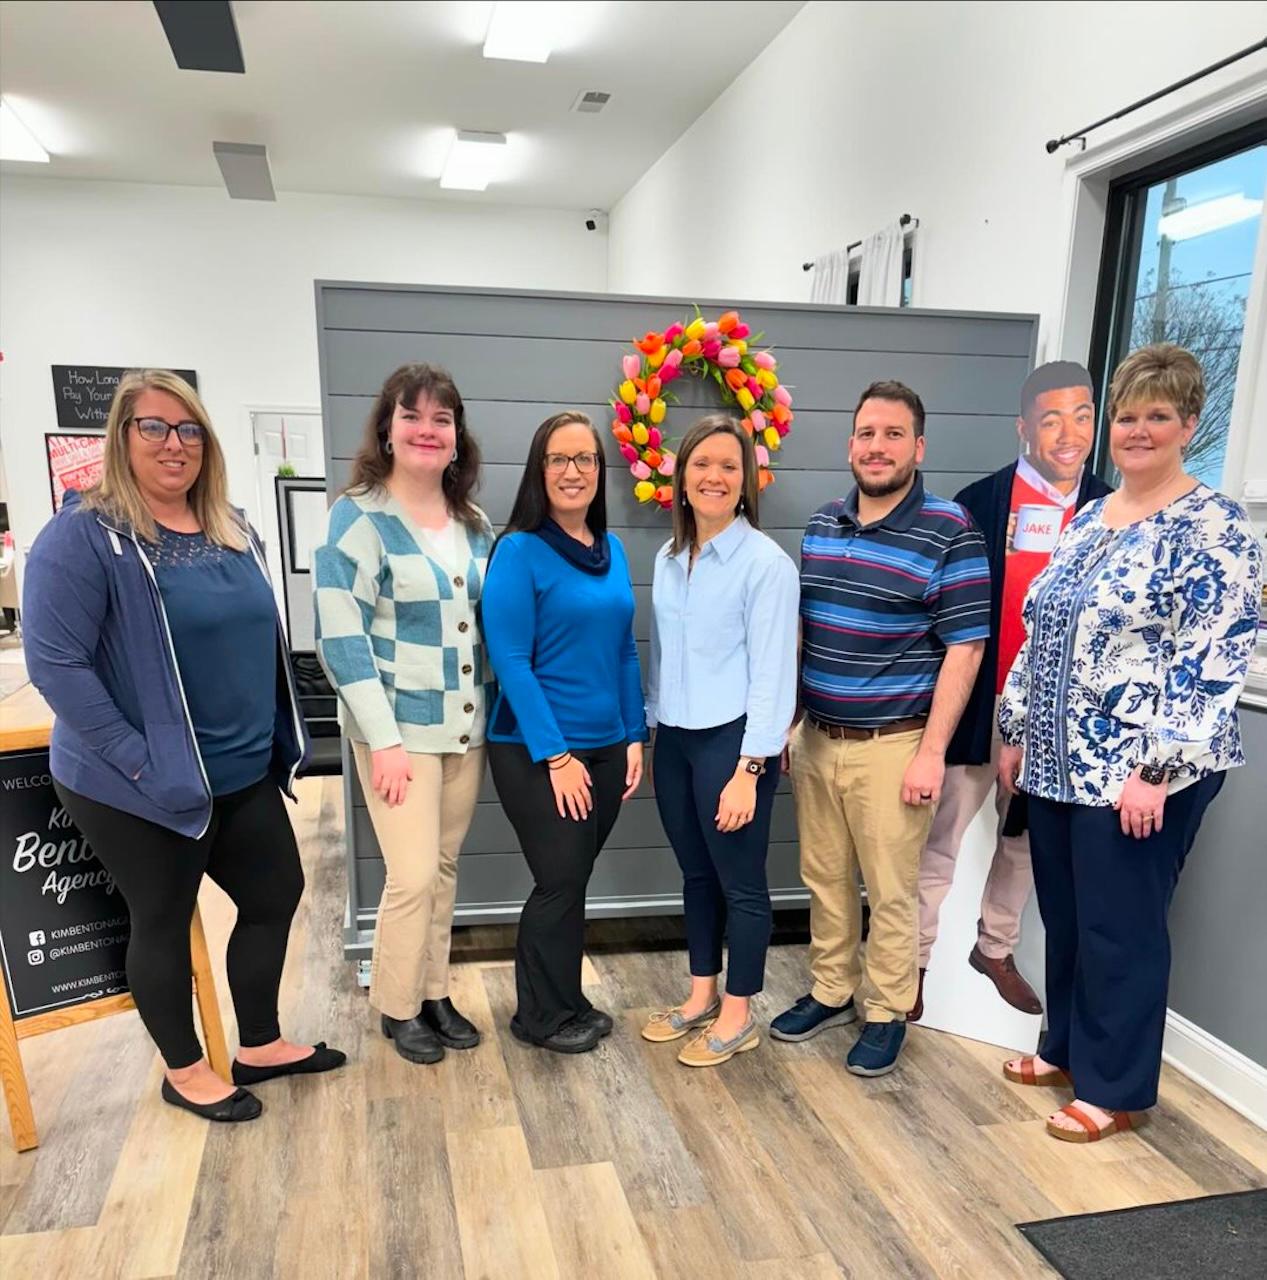 United in blue, raising awareness for World Autism Awareness Day! 
Did you know that according to th Kim Benton - State Farm Insurance Agent Millsboro (302)934-9393